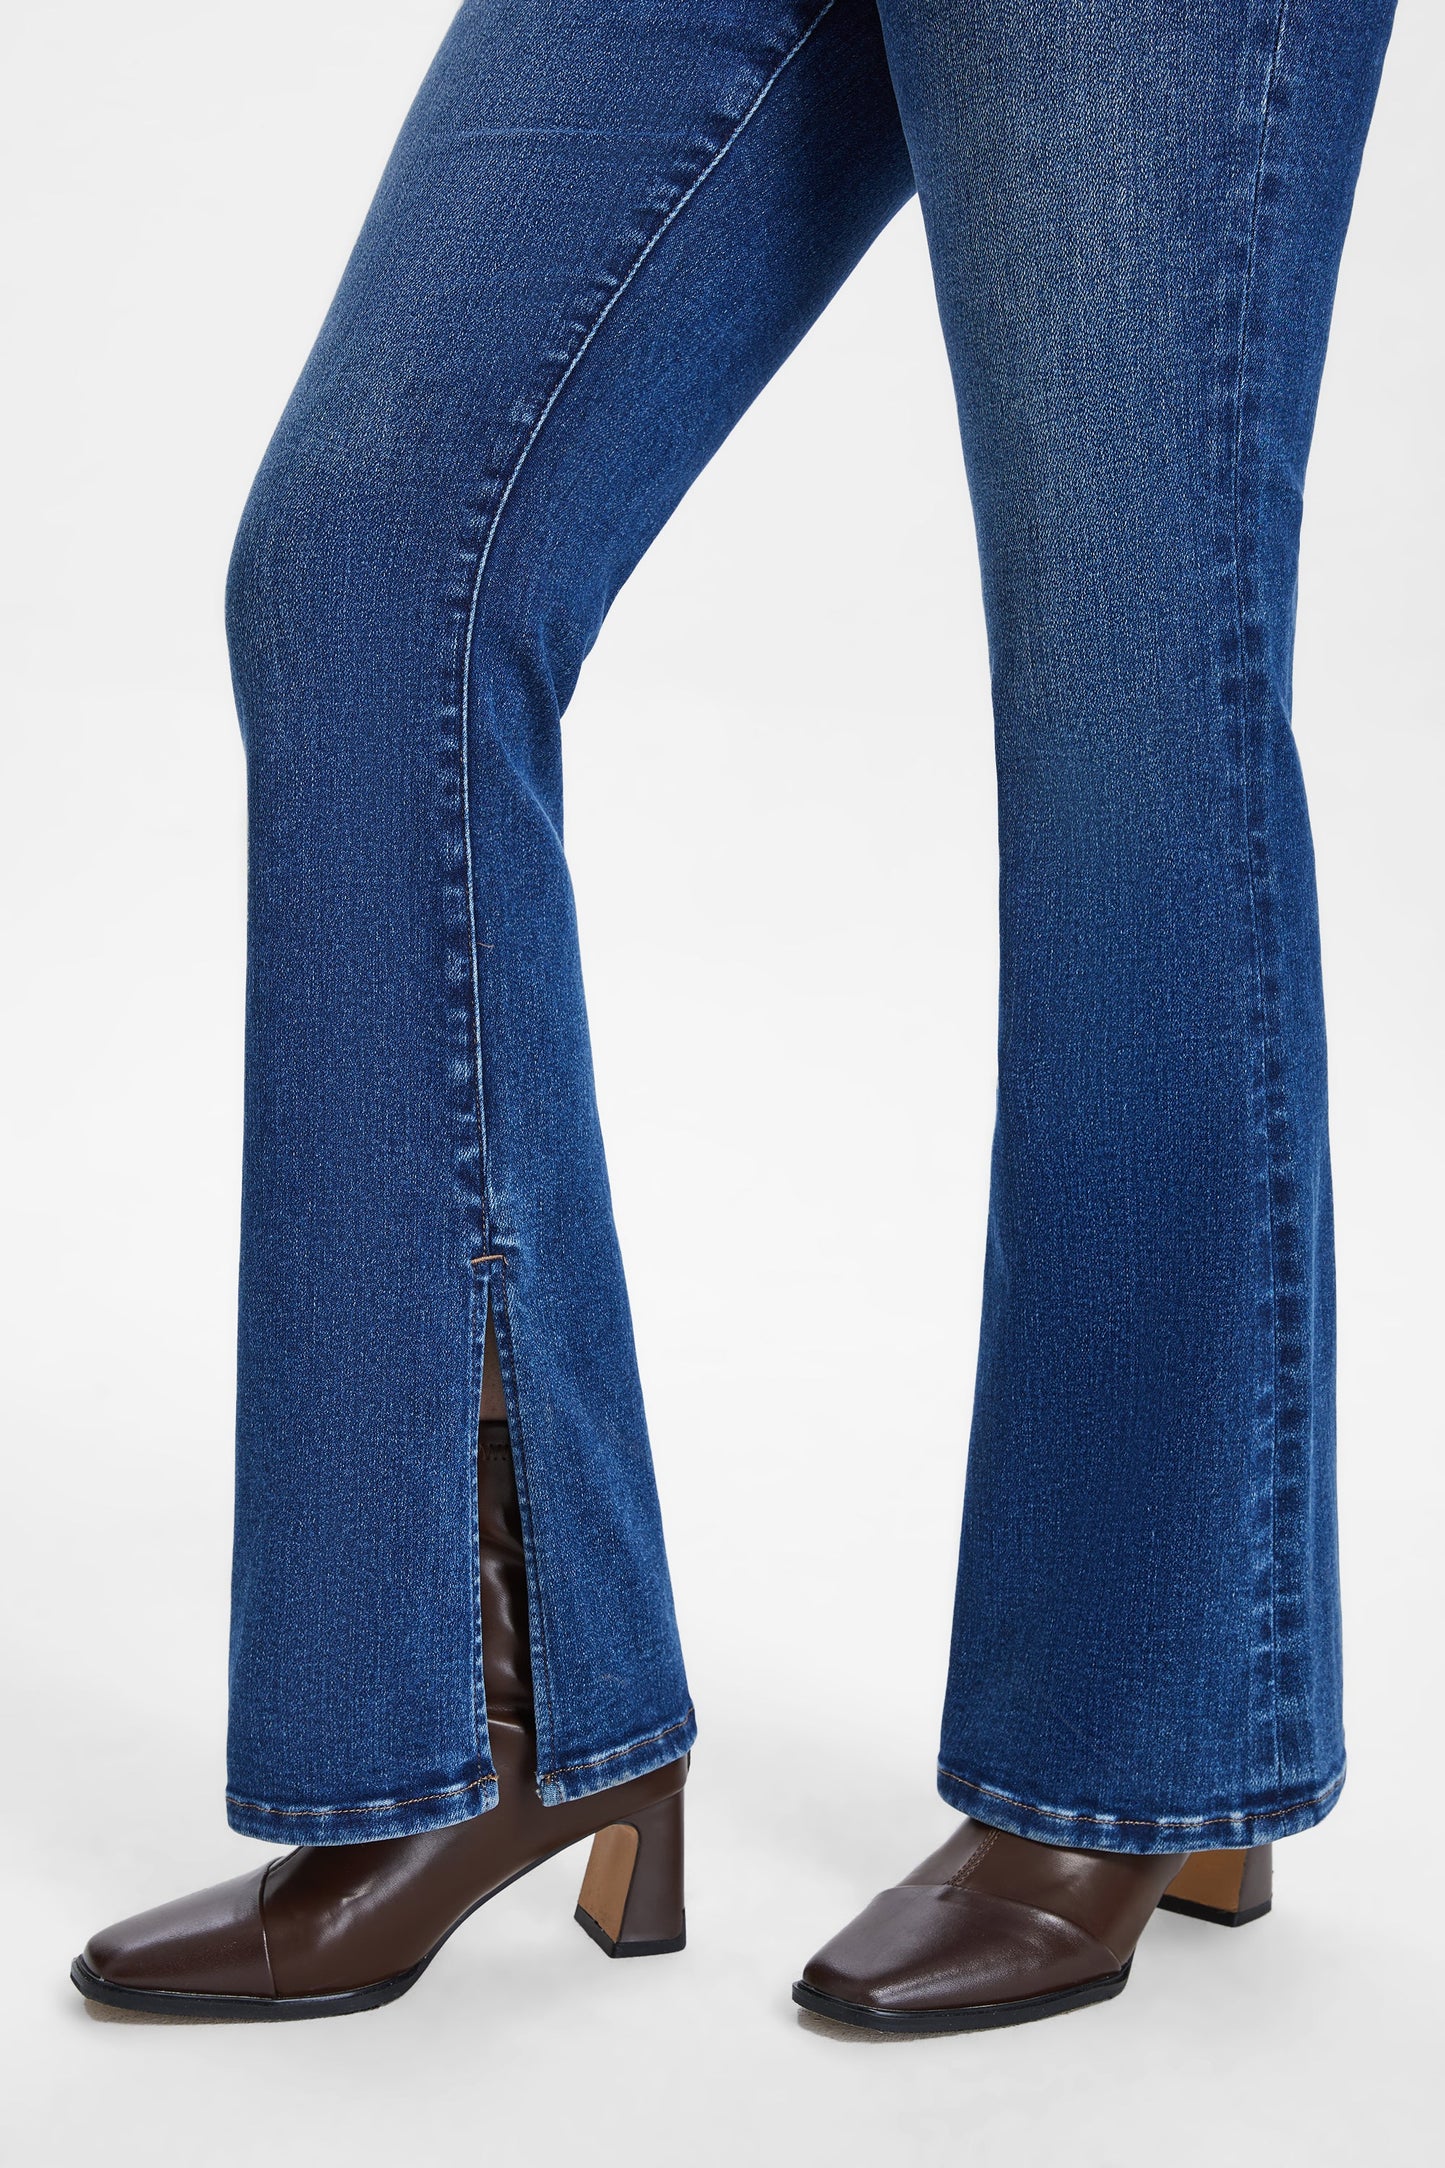 HIGH RISE FLARE JEANS WITH SLIT BYF1095 STARLIGHT